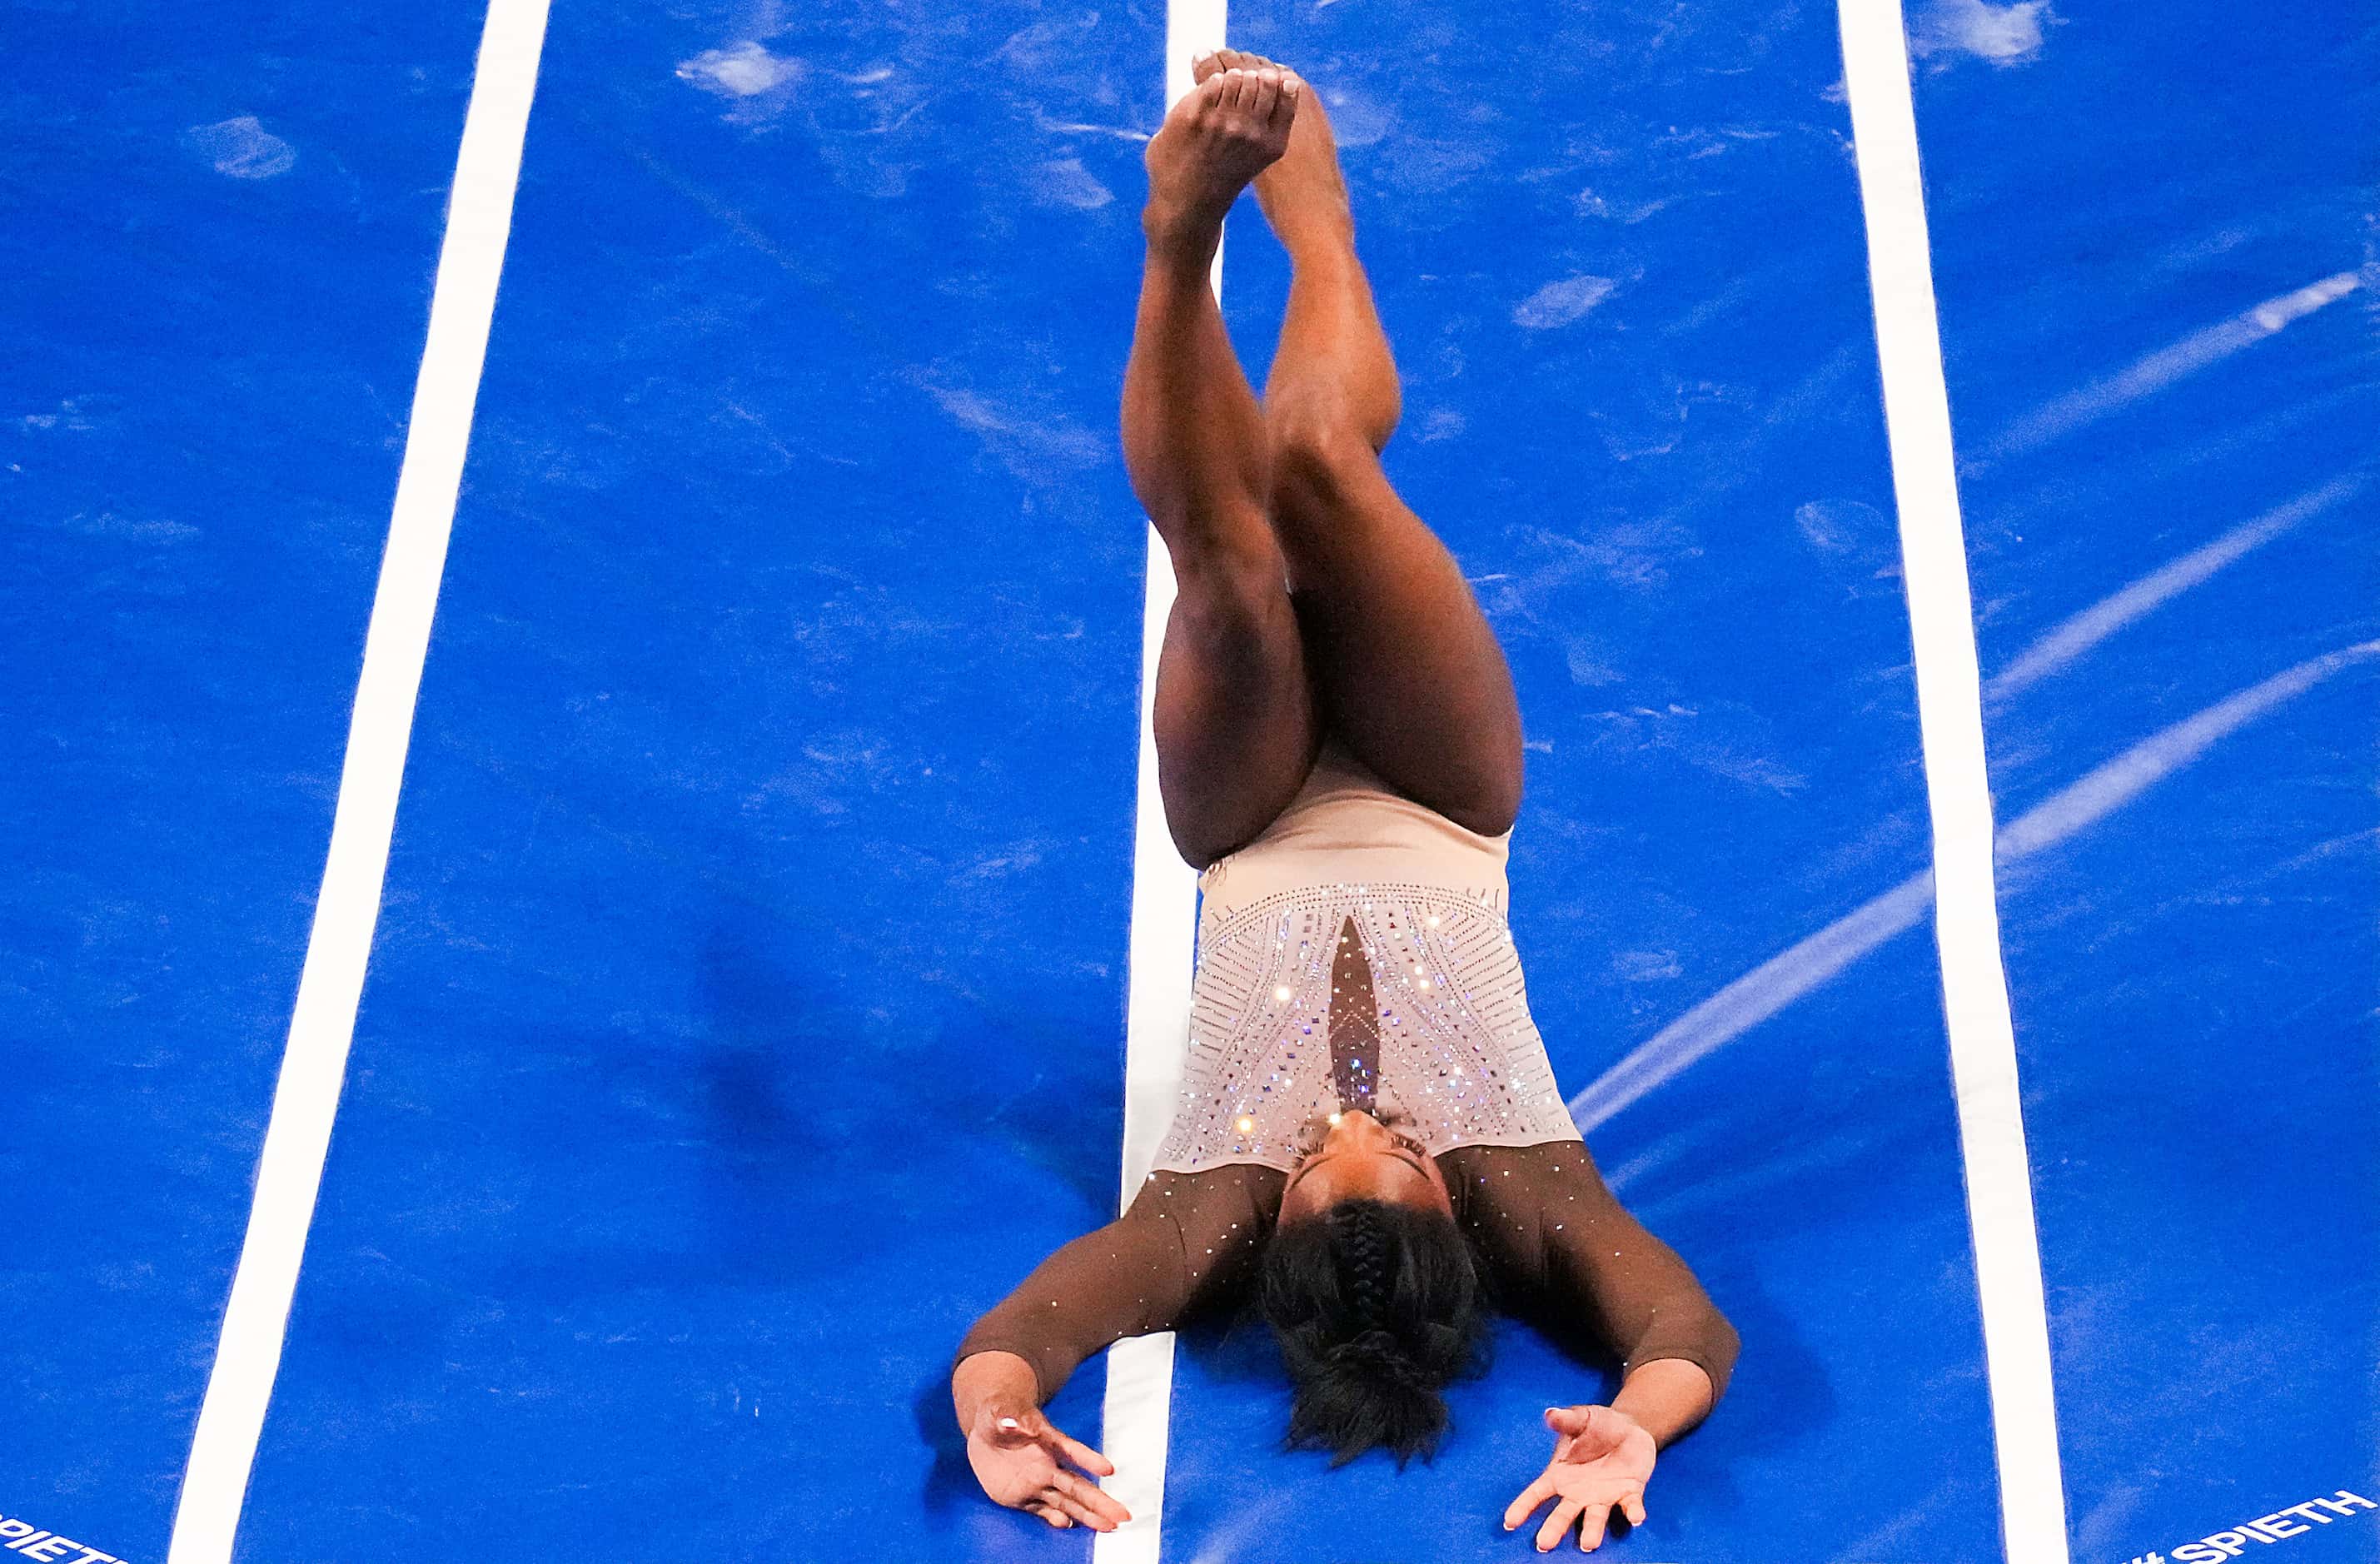 Simone Biles rolls backwards on her landing as she competes on the vault during the U.S....